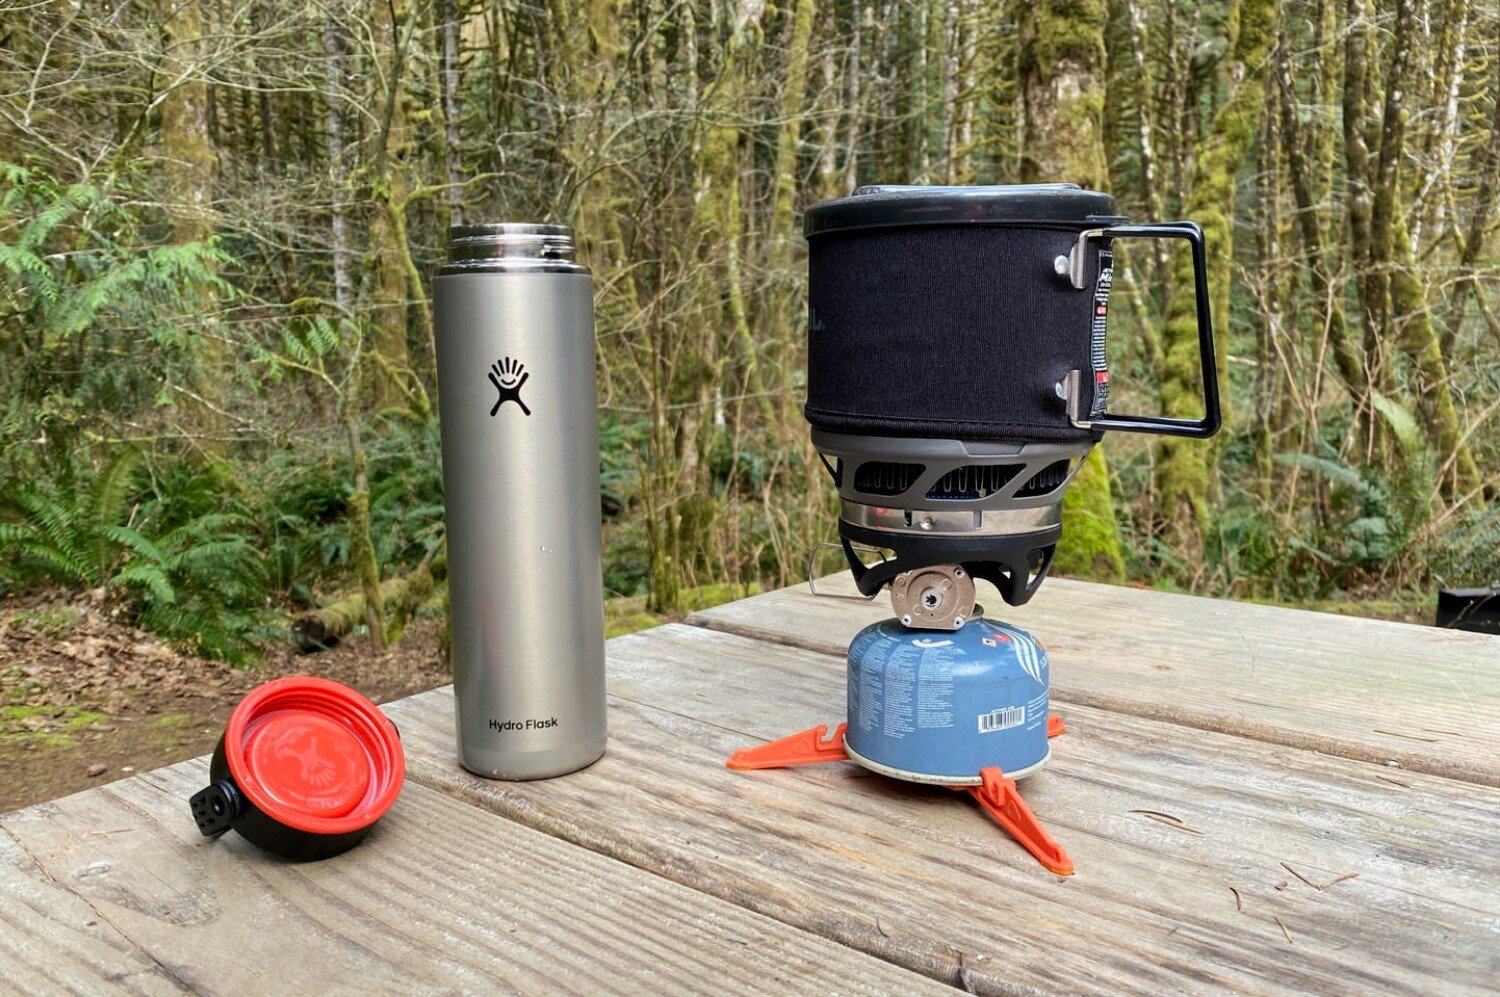 https://www.cleverhiker.com/wp-content/uploads/2020/05/Boiling-water-in-the-Jetboil-Minimo-Integrated-Canister-Stove-System-while-camping-in-the-Pacific-Northwest-to-make-hot-tea-in-the-Hydro-Flask-Lightwe.jpeg